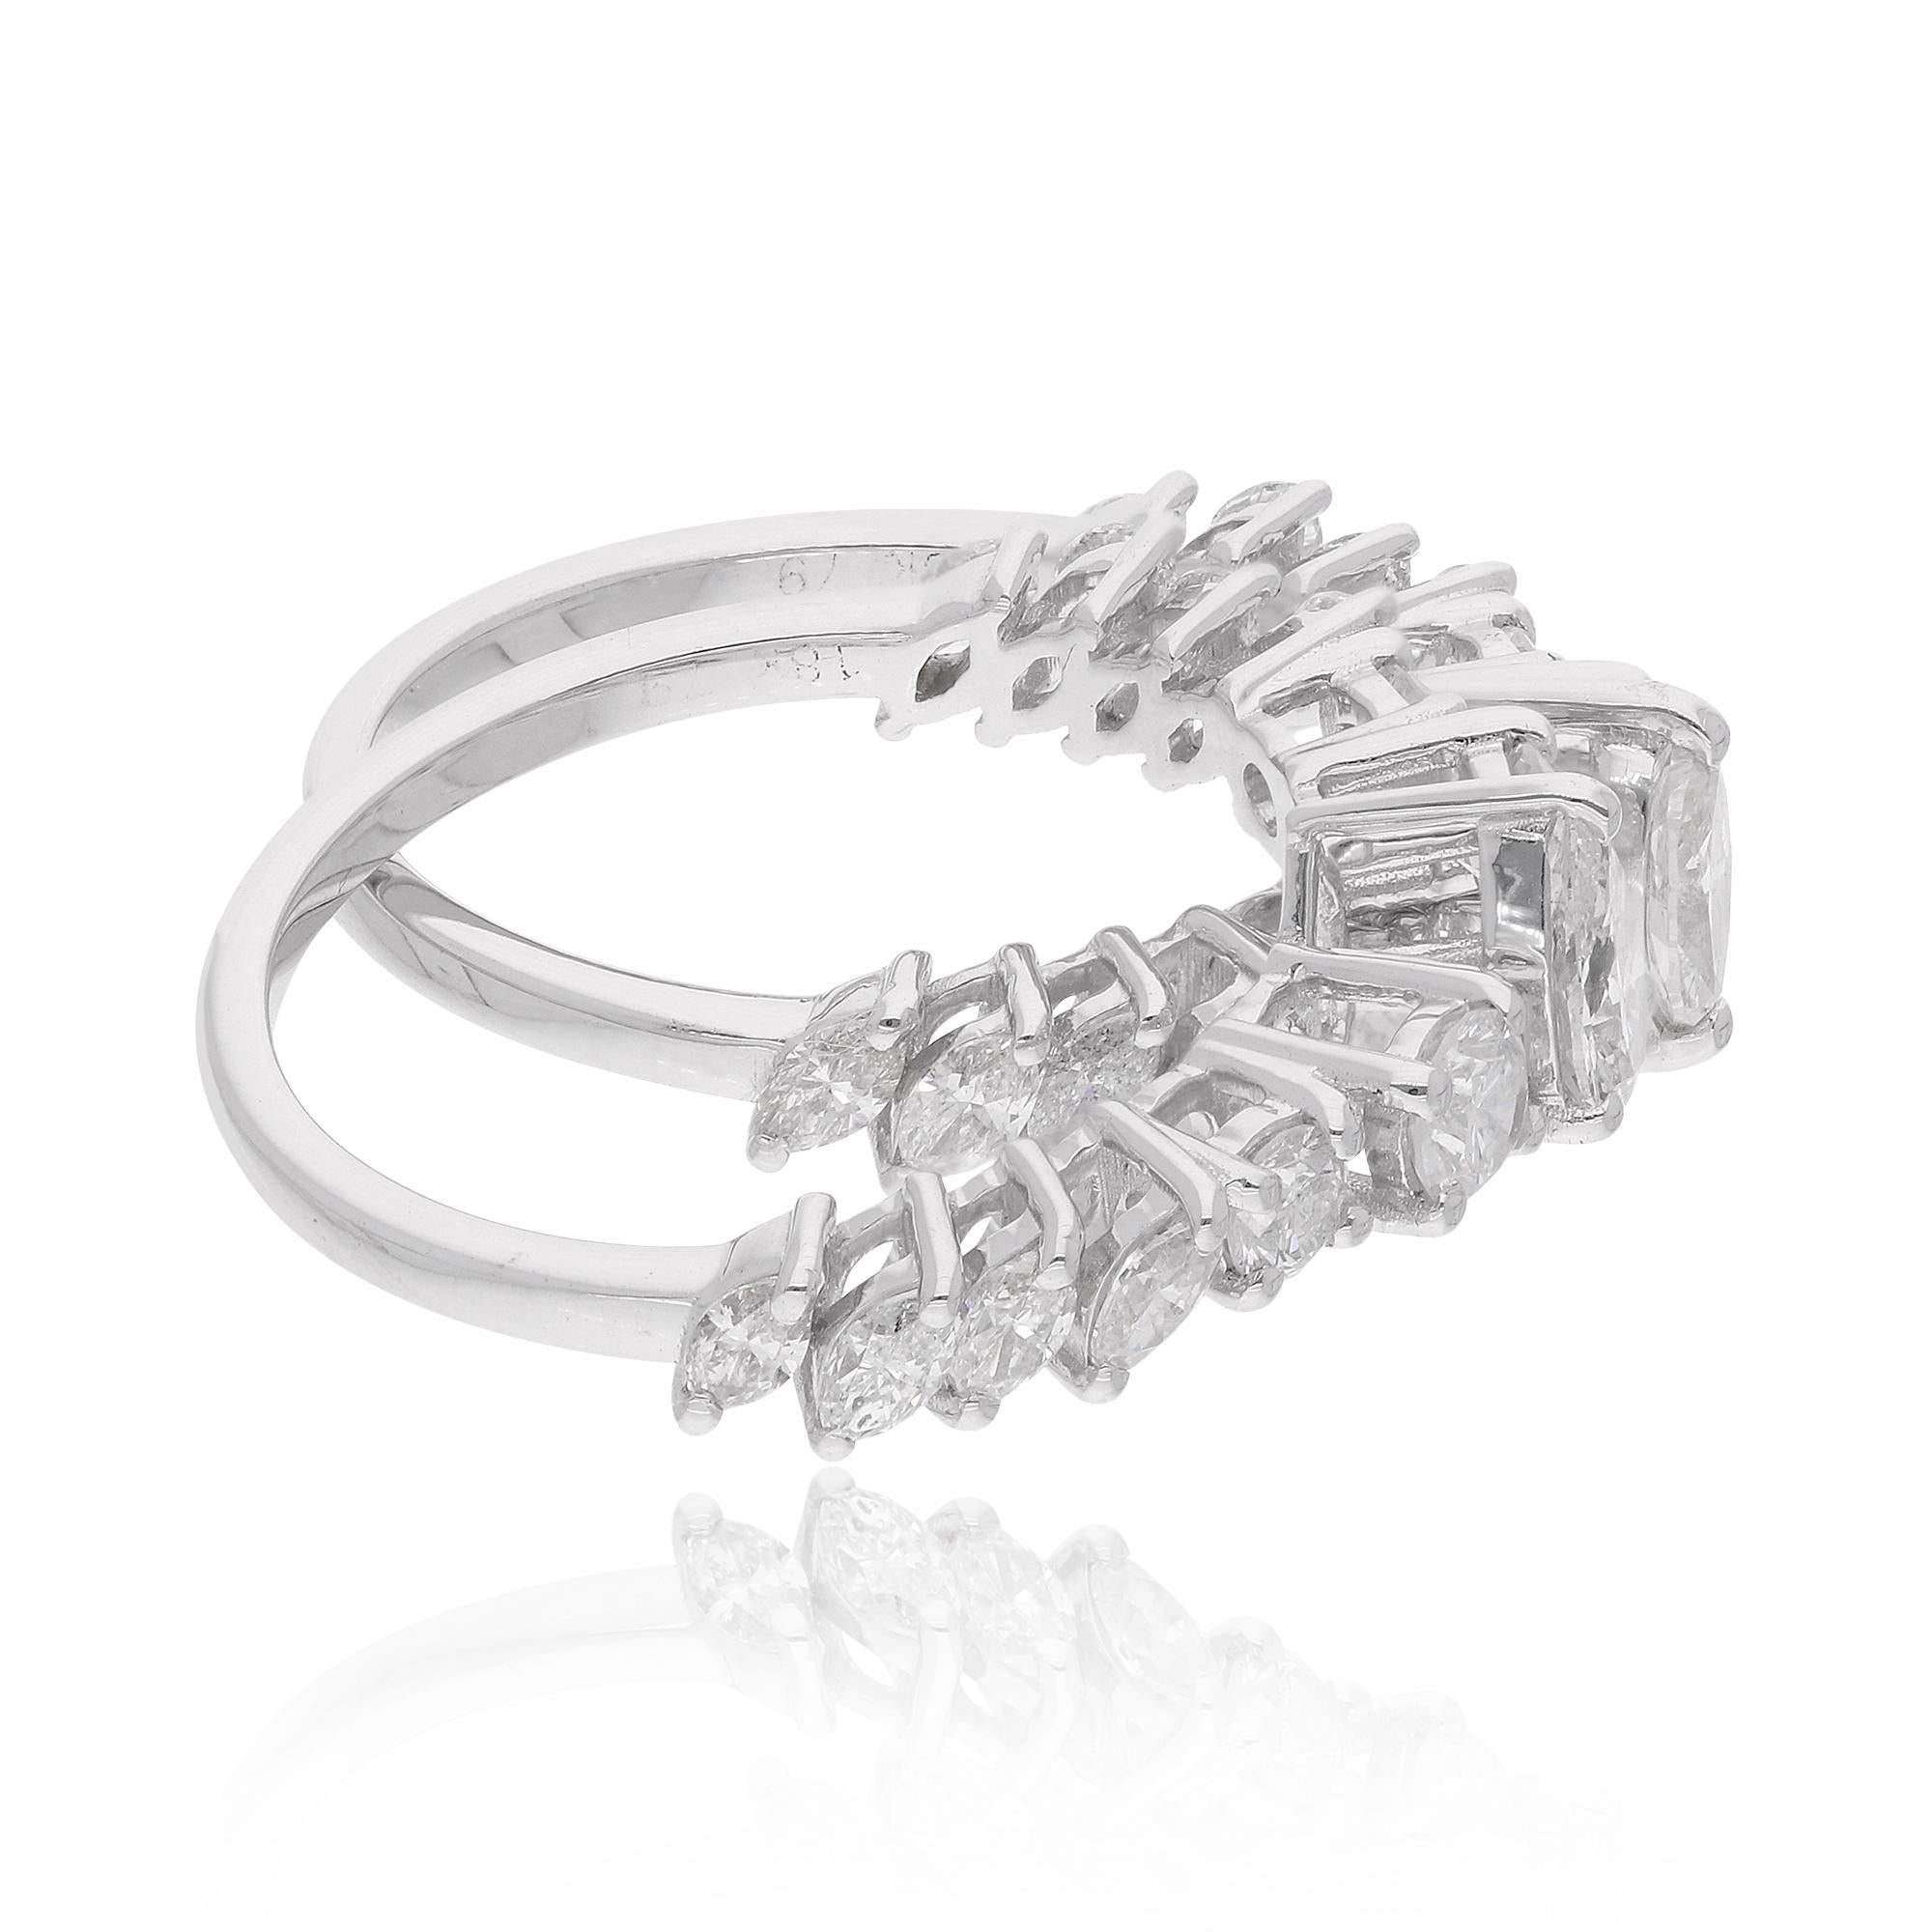 A stackable ring featuring a natural 2.20 carat diamond in 18 karat white gold is a versatile and stylish piece of handmade jewelry. The ring is designed to be worn alone or stacked with other rings to create a personalized and unique look.

Item